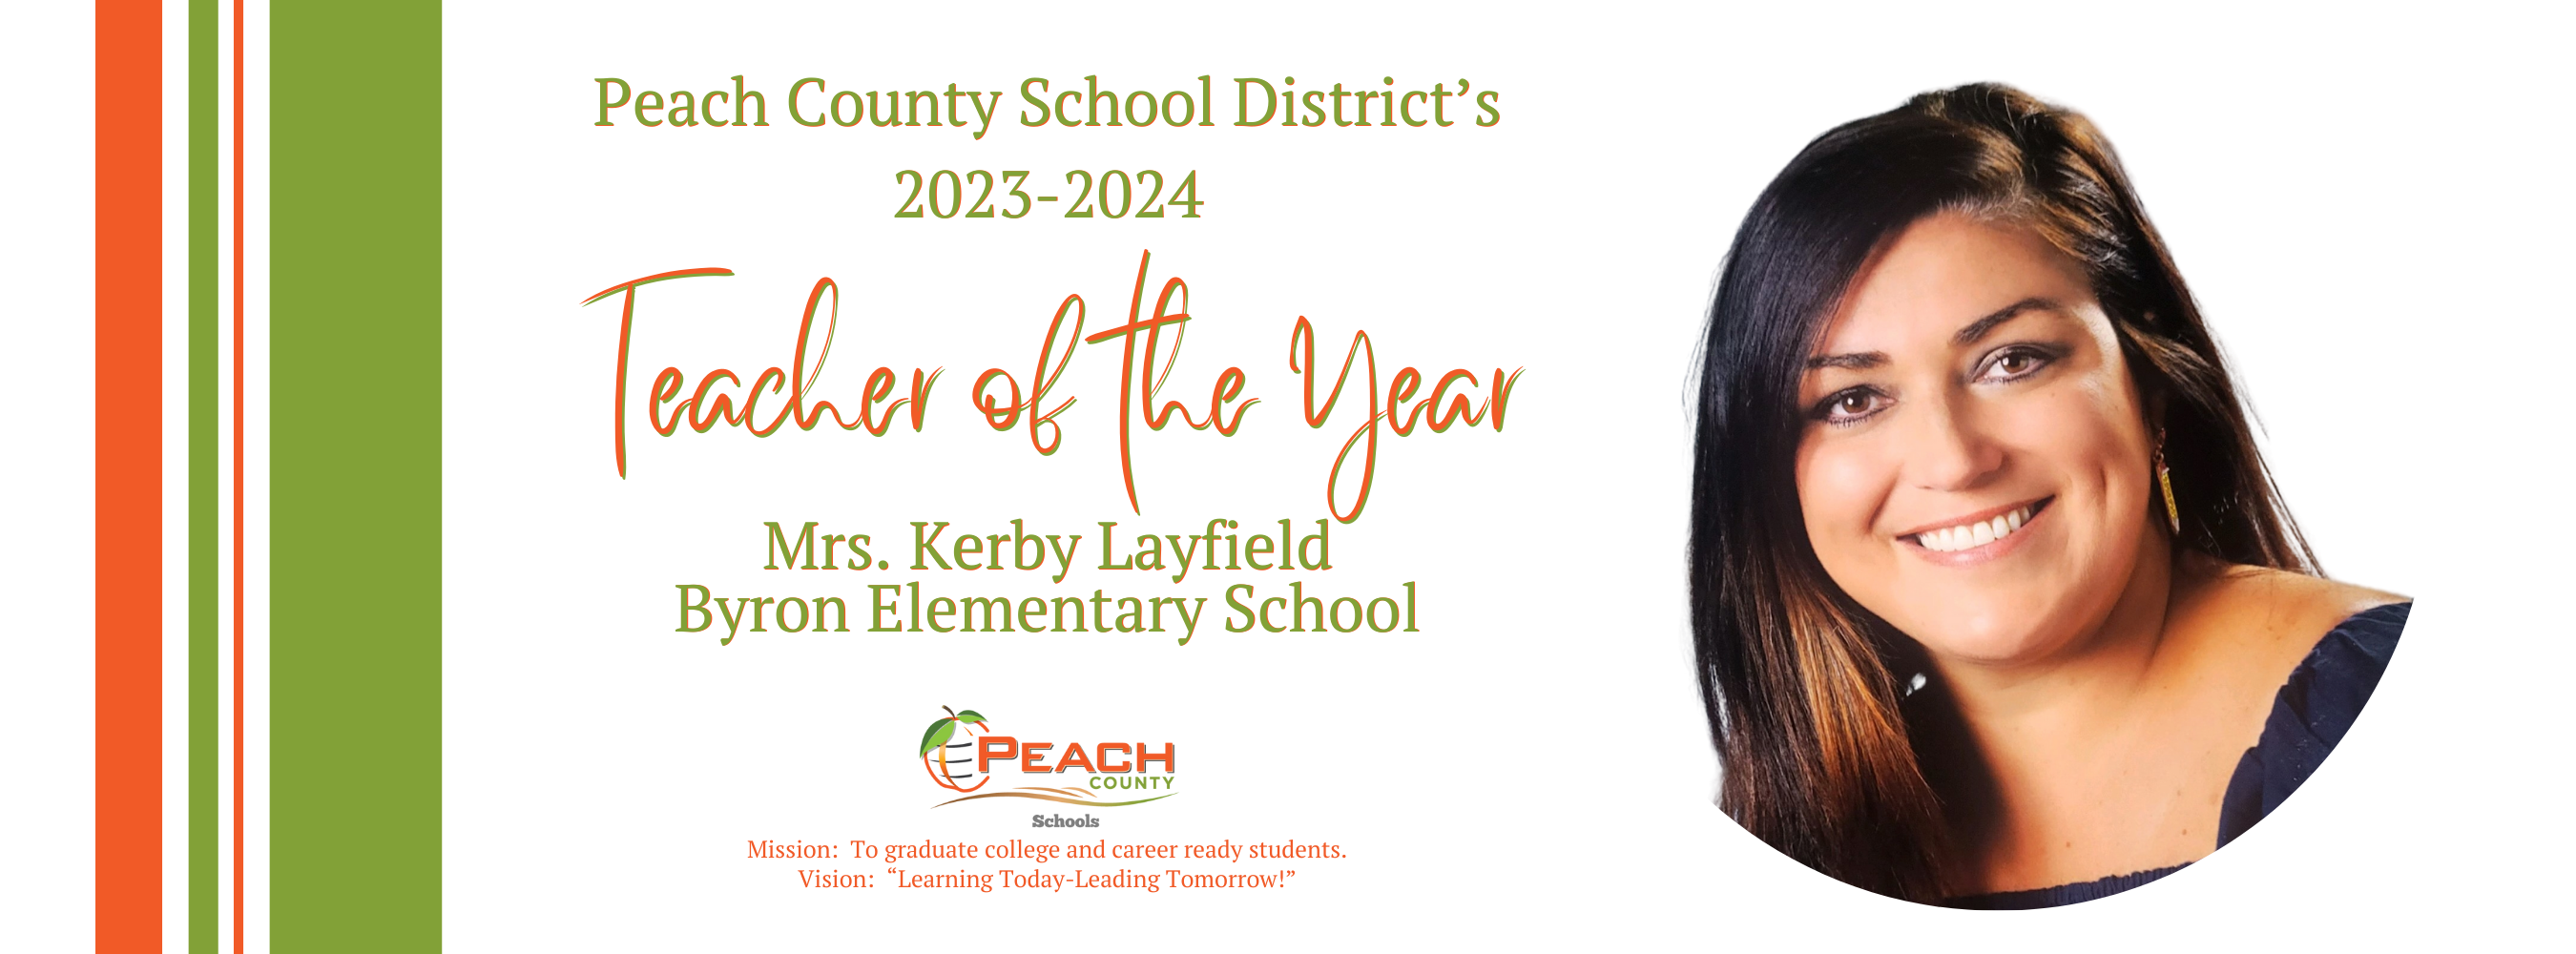 2023-2024 Teacher of the Year - Mrs. Kerby Layfield